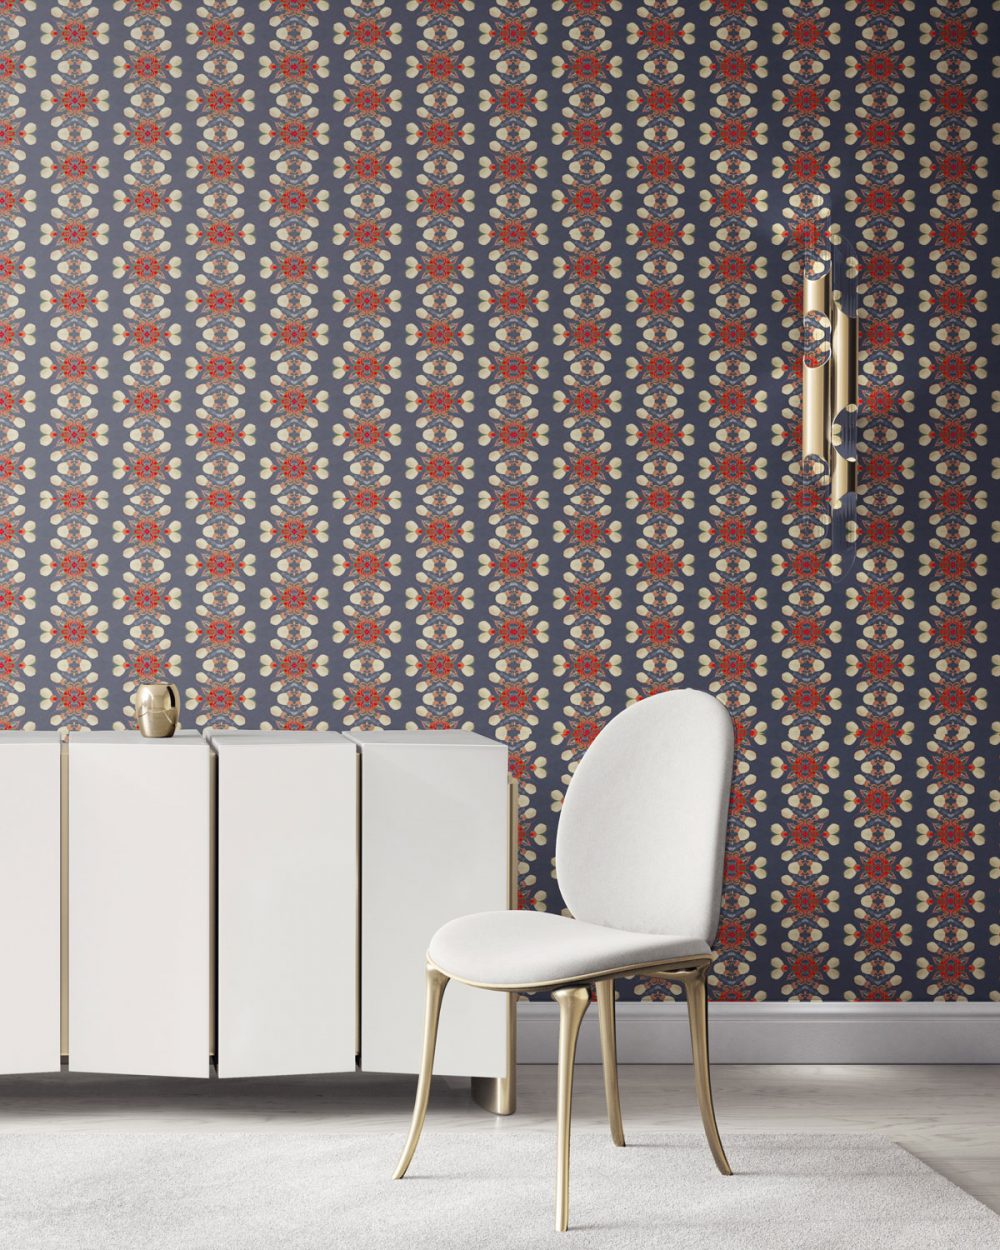 is an artisanal wallpaper for luxury interiors. , Arabella in grey and red is an artisanal wallpaper created for luxury interiors. It's the perfect wallcovering for bold, masculine and sophisticated environments. Vellum wallpaper comes untrimmed. Standard wallpaper comes pre-pasted.